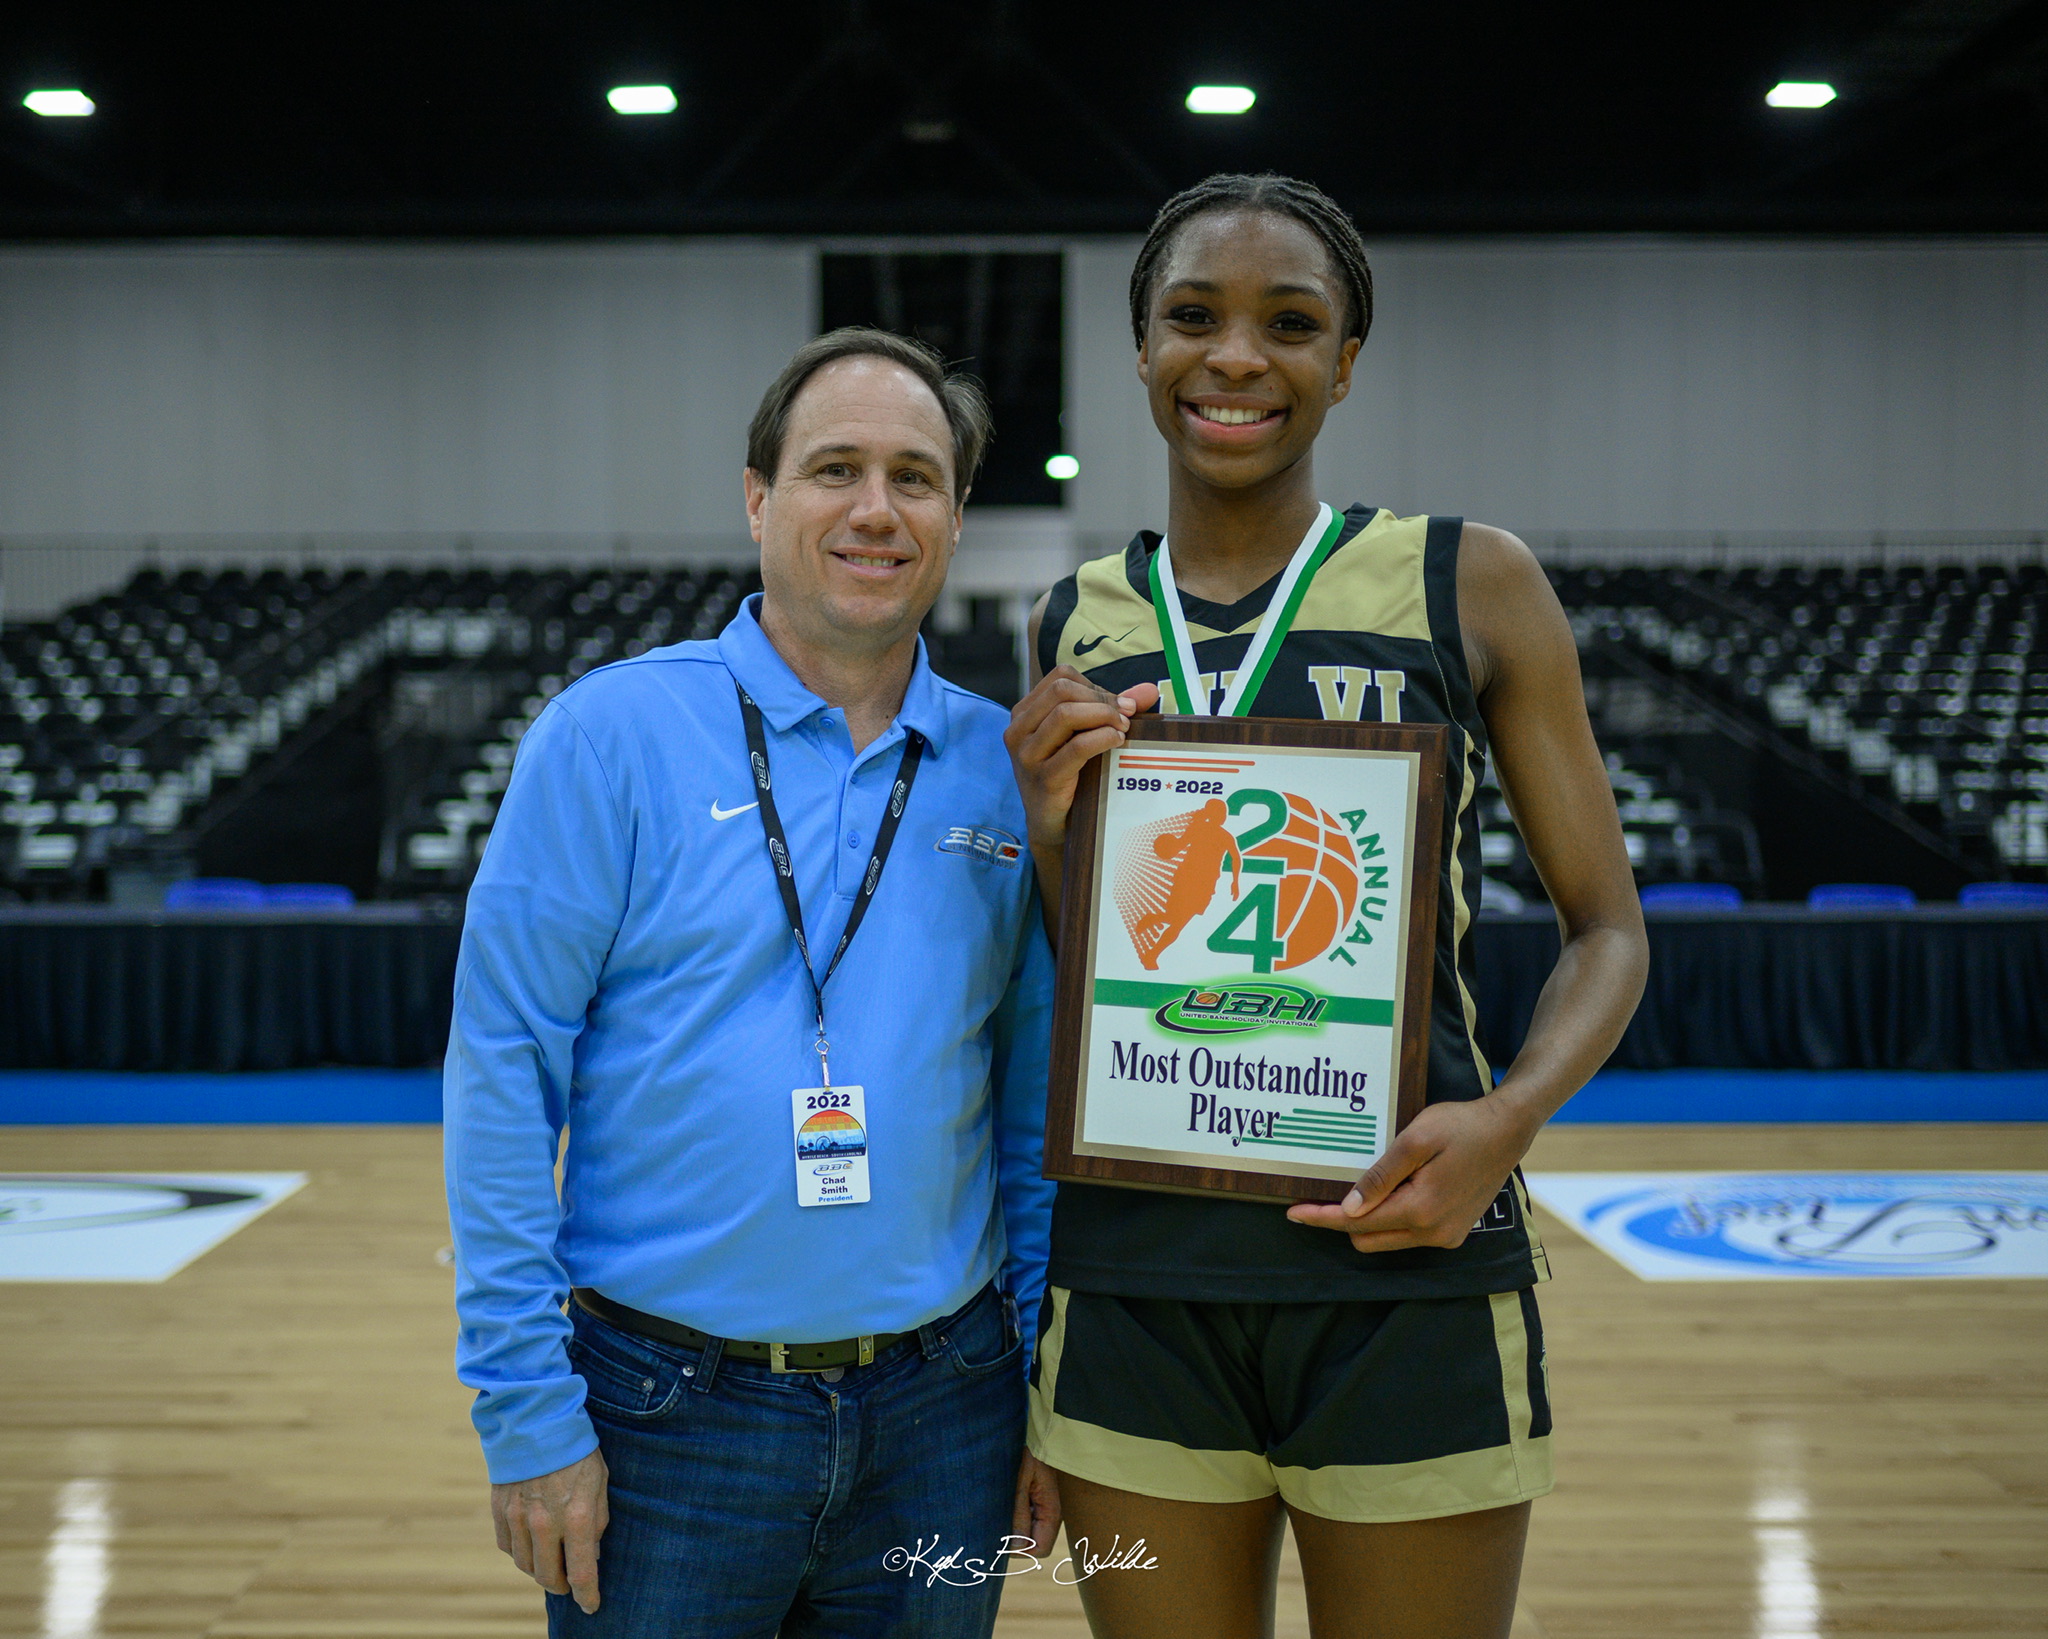 #24 Laura Williams named UBHI Most Outstanding Player for 2022 Tournament